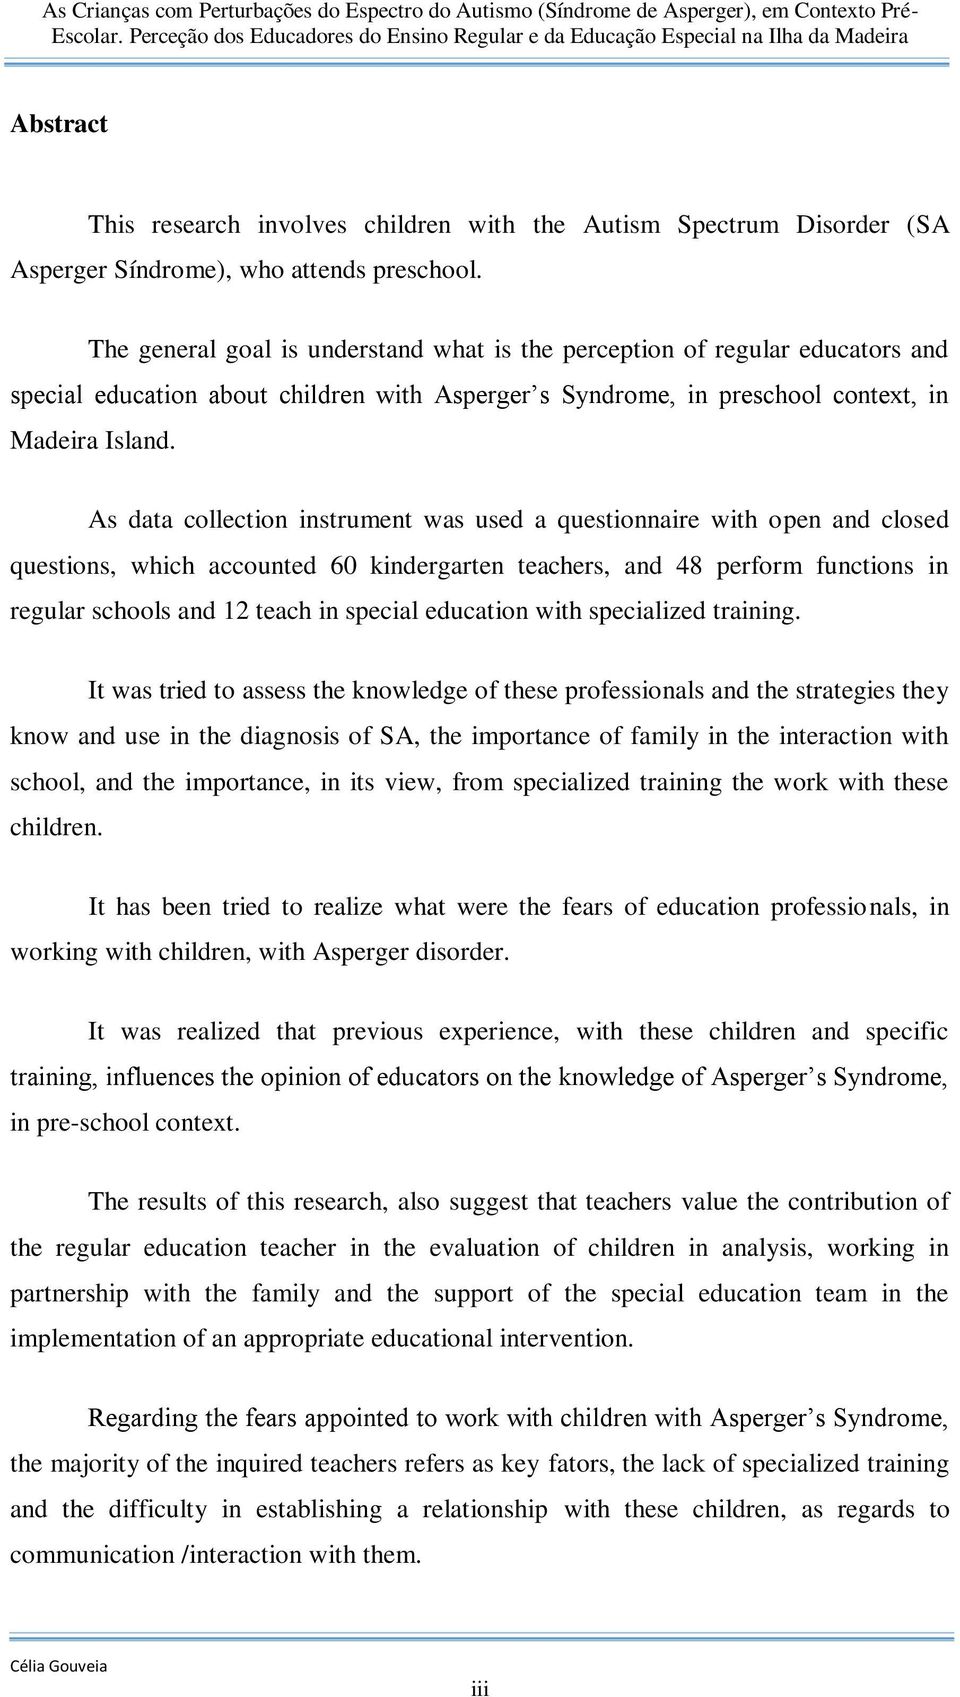 As data collection instrument was used a questionnaire with open and closed questions, which accounted 60 kindergarten teachers, and 48 perform functions in regular schools and 12 teach in special